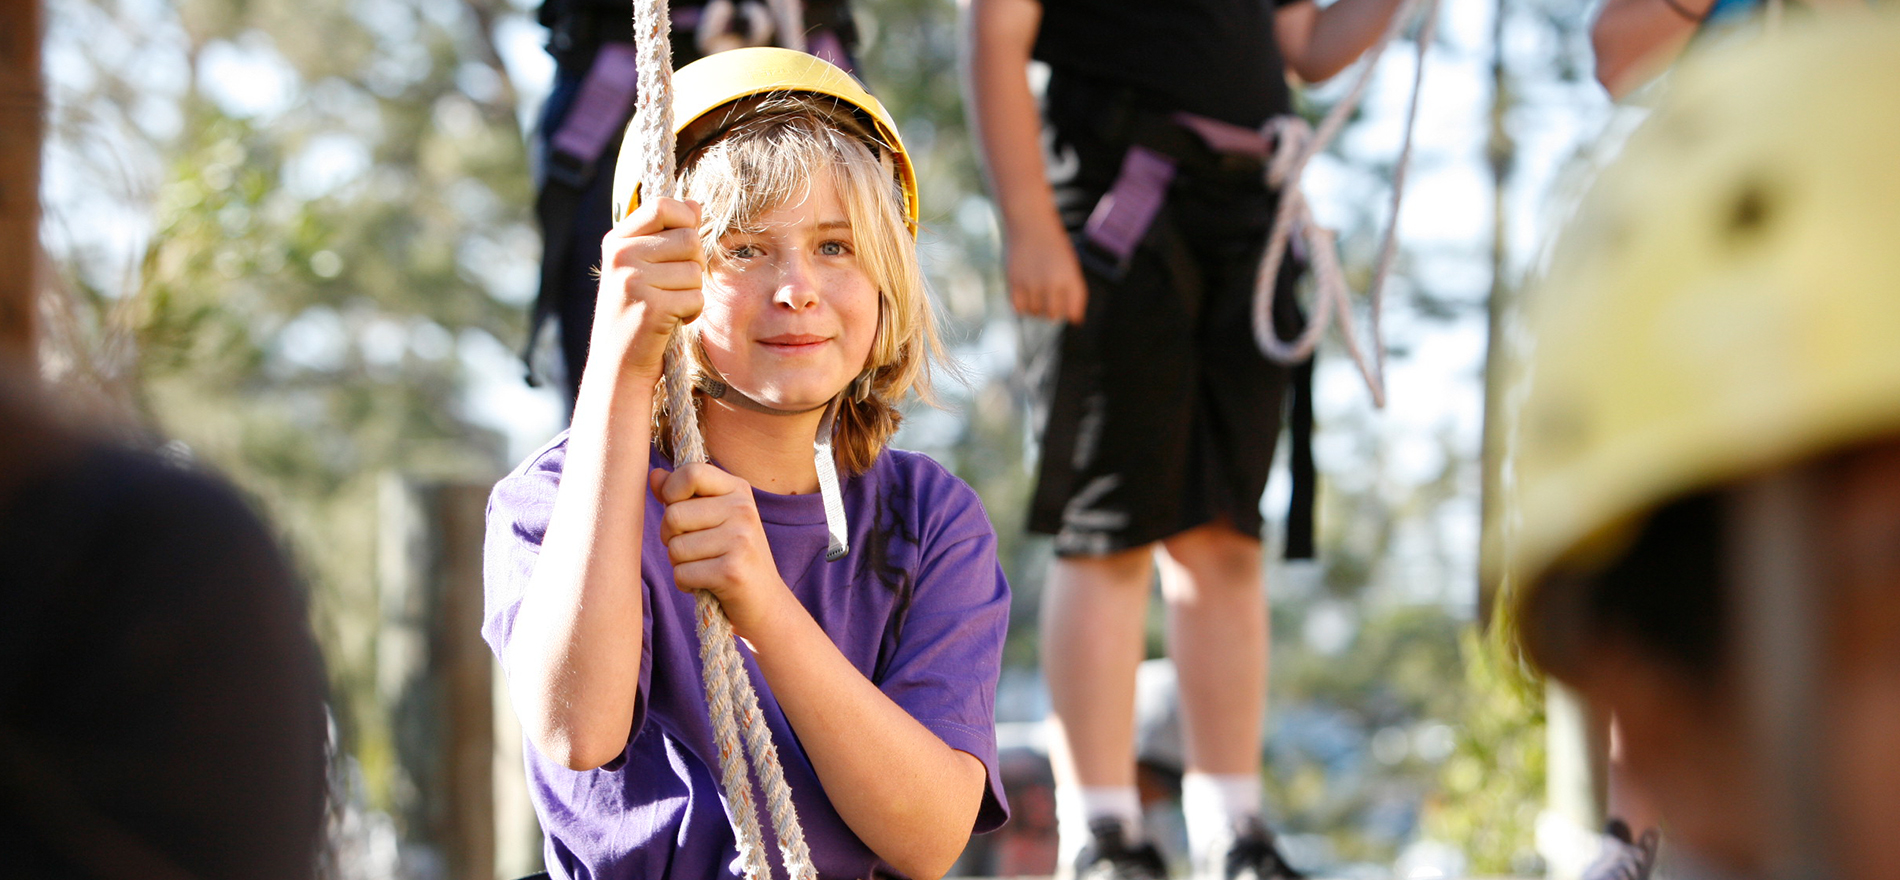 <a style="color:#fff;" href="https://adventureplex.campbrainregistration.com/">Climb to New Heights with Ropes & Rock Wall!</a>